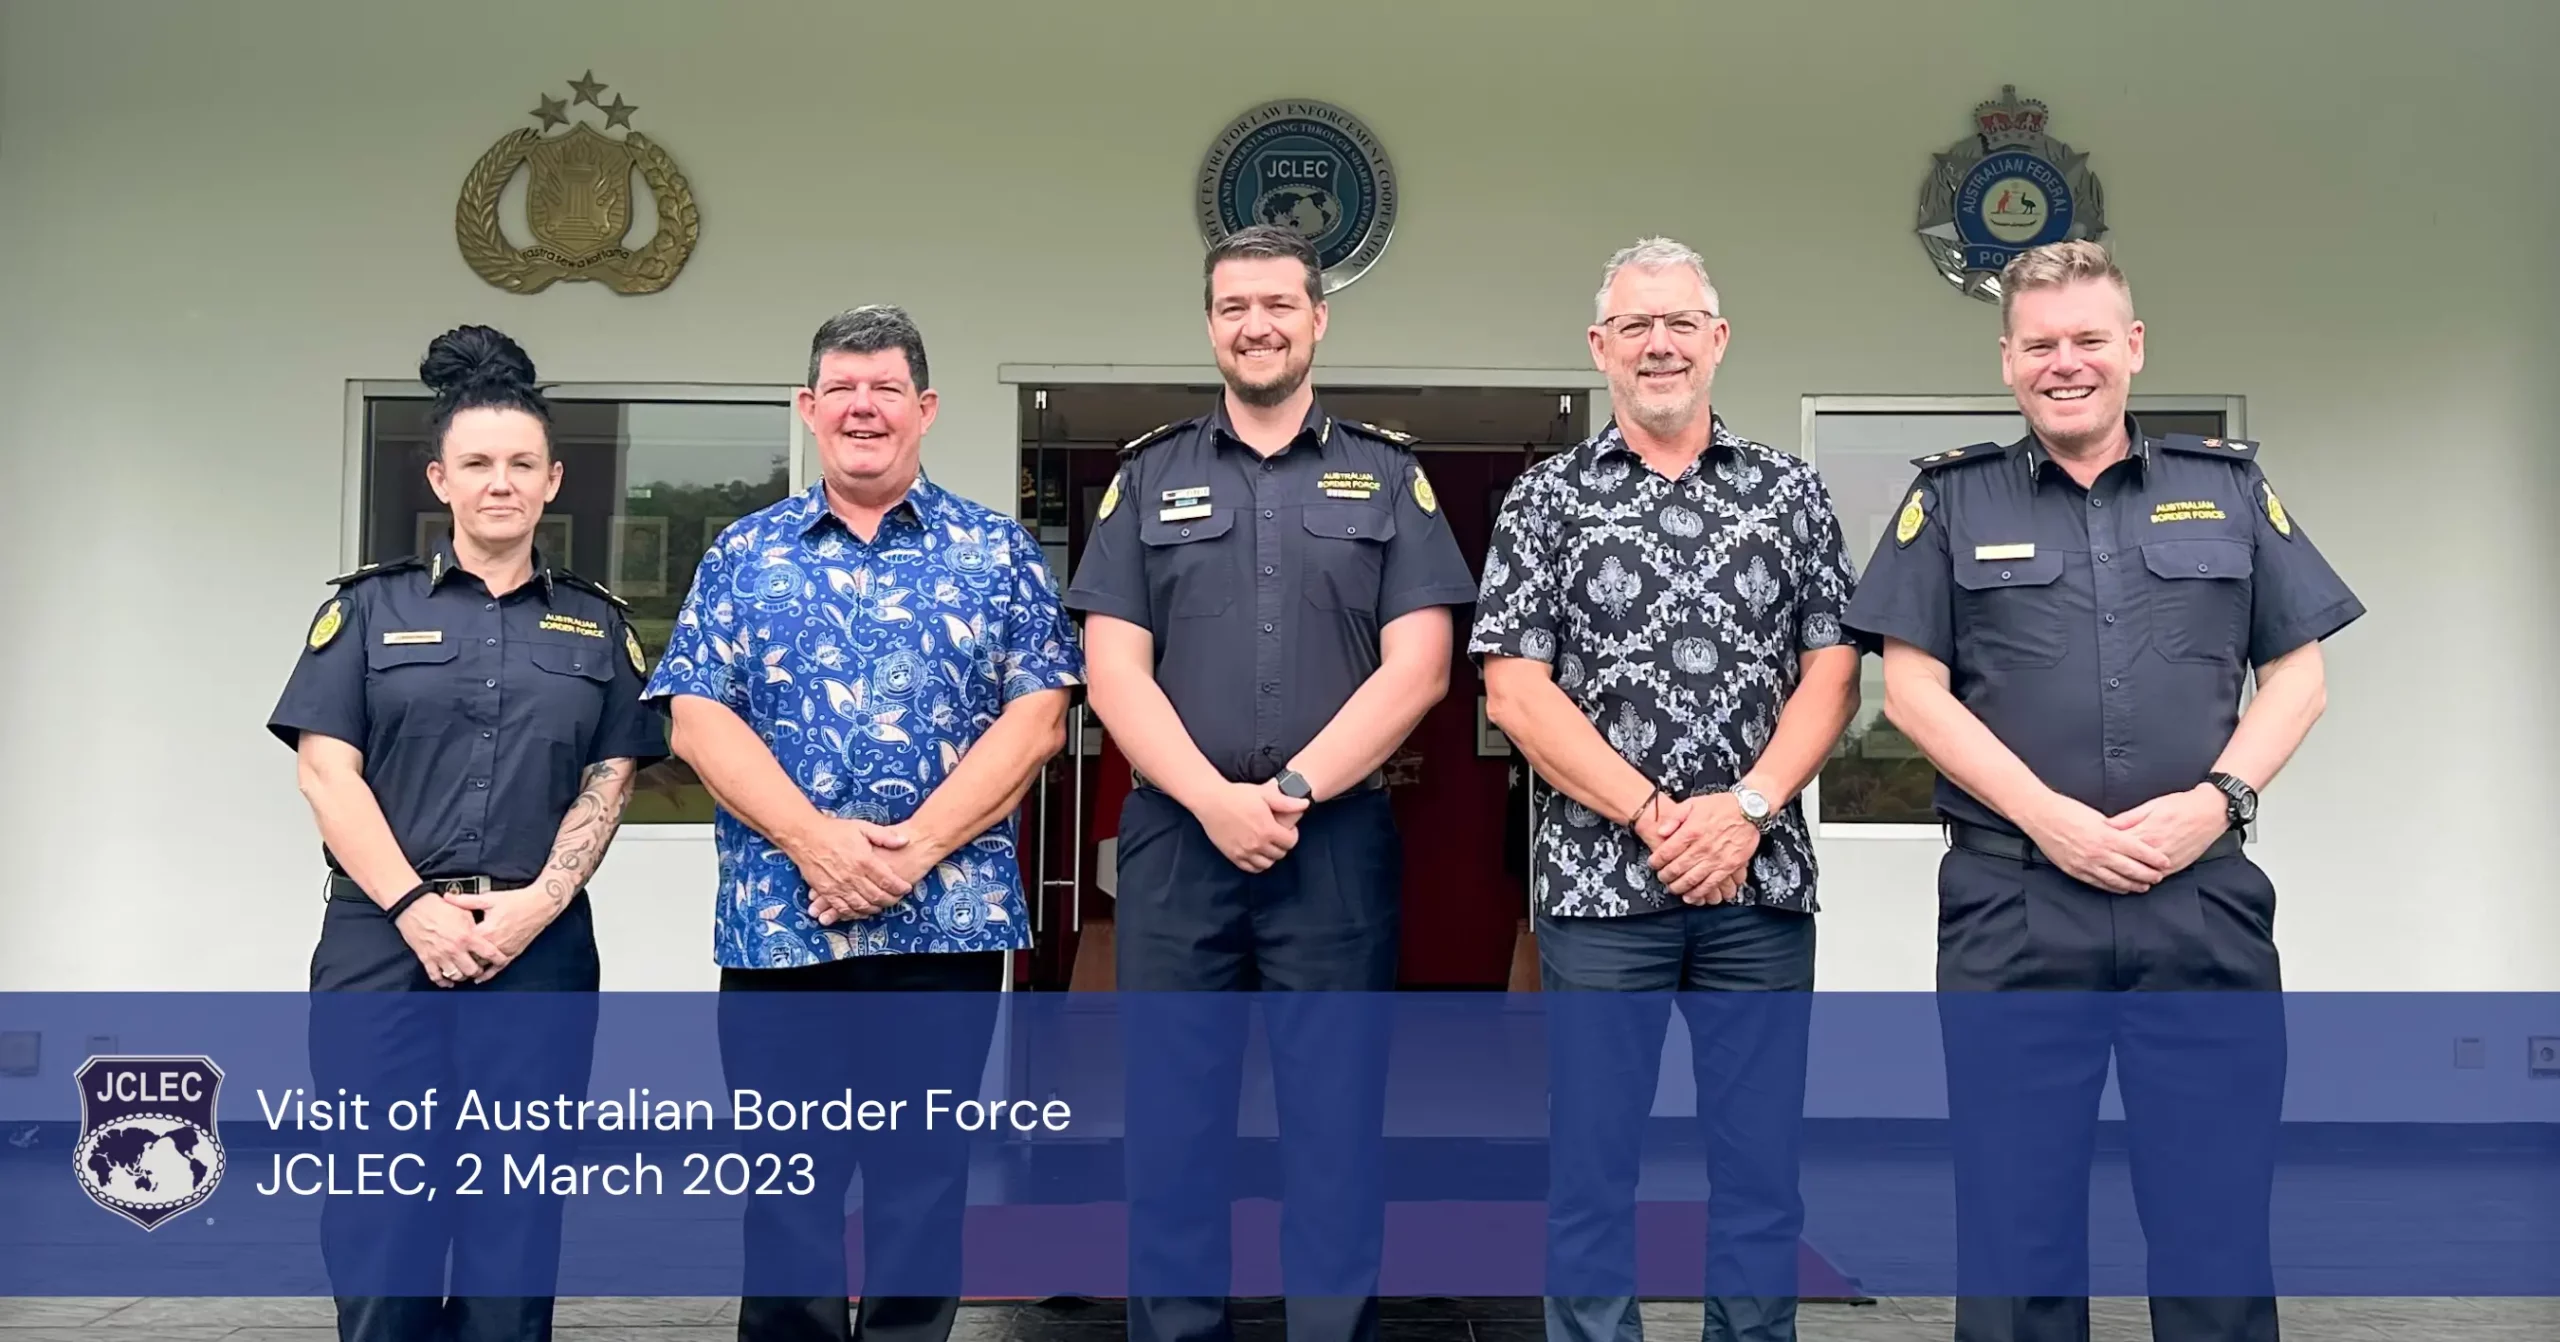 1.	Official photograph of JCLEC Management with the Australian Border Force delegates